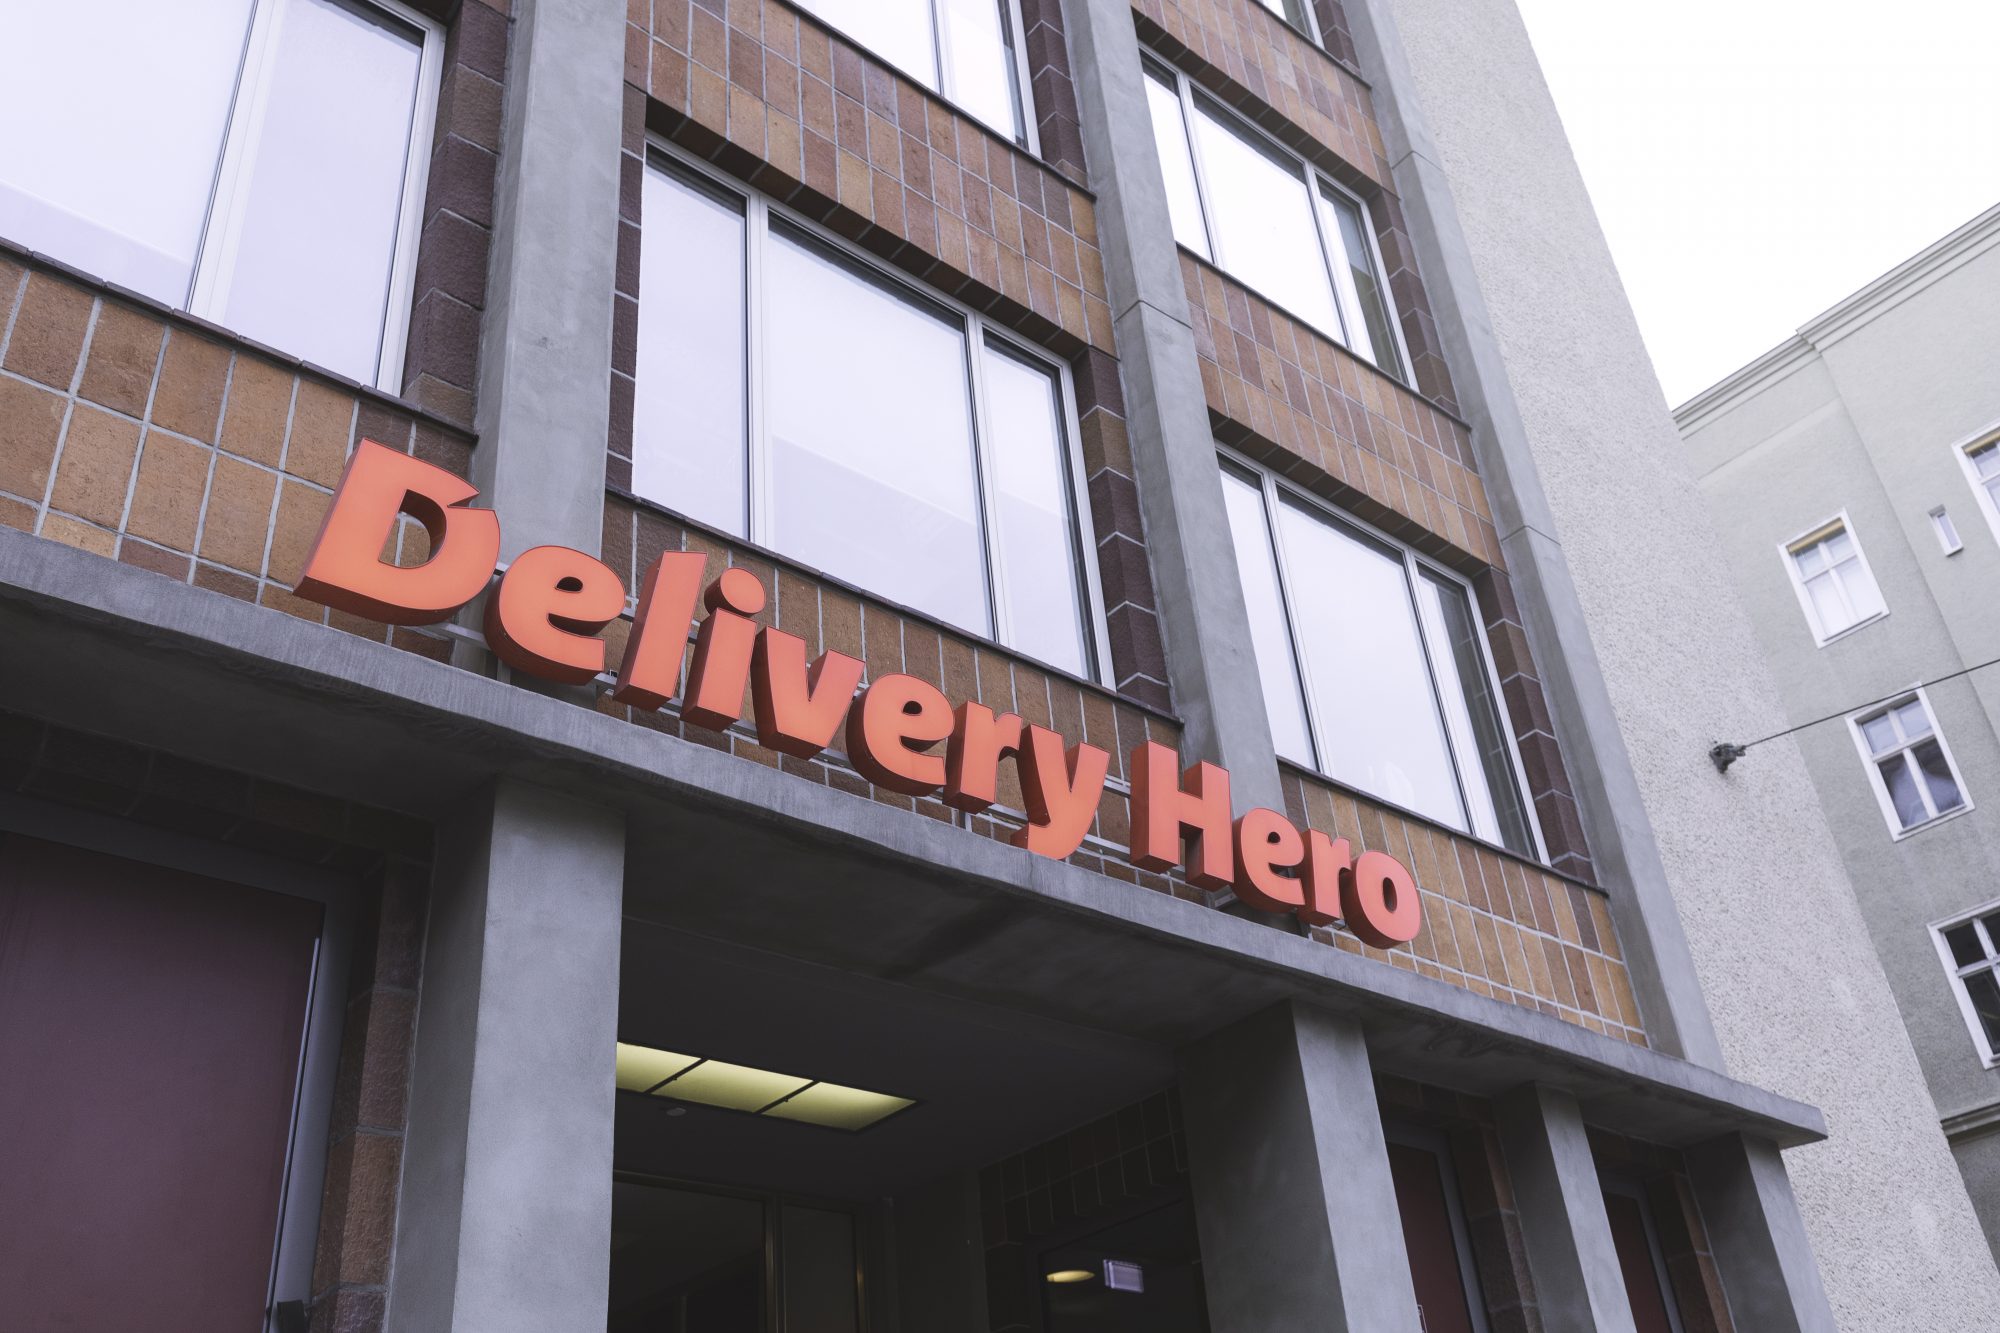 Delivery Hero Concludes 2019 with Order Growth of 99% in Q4 and Invests Further for Growth